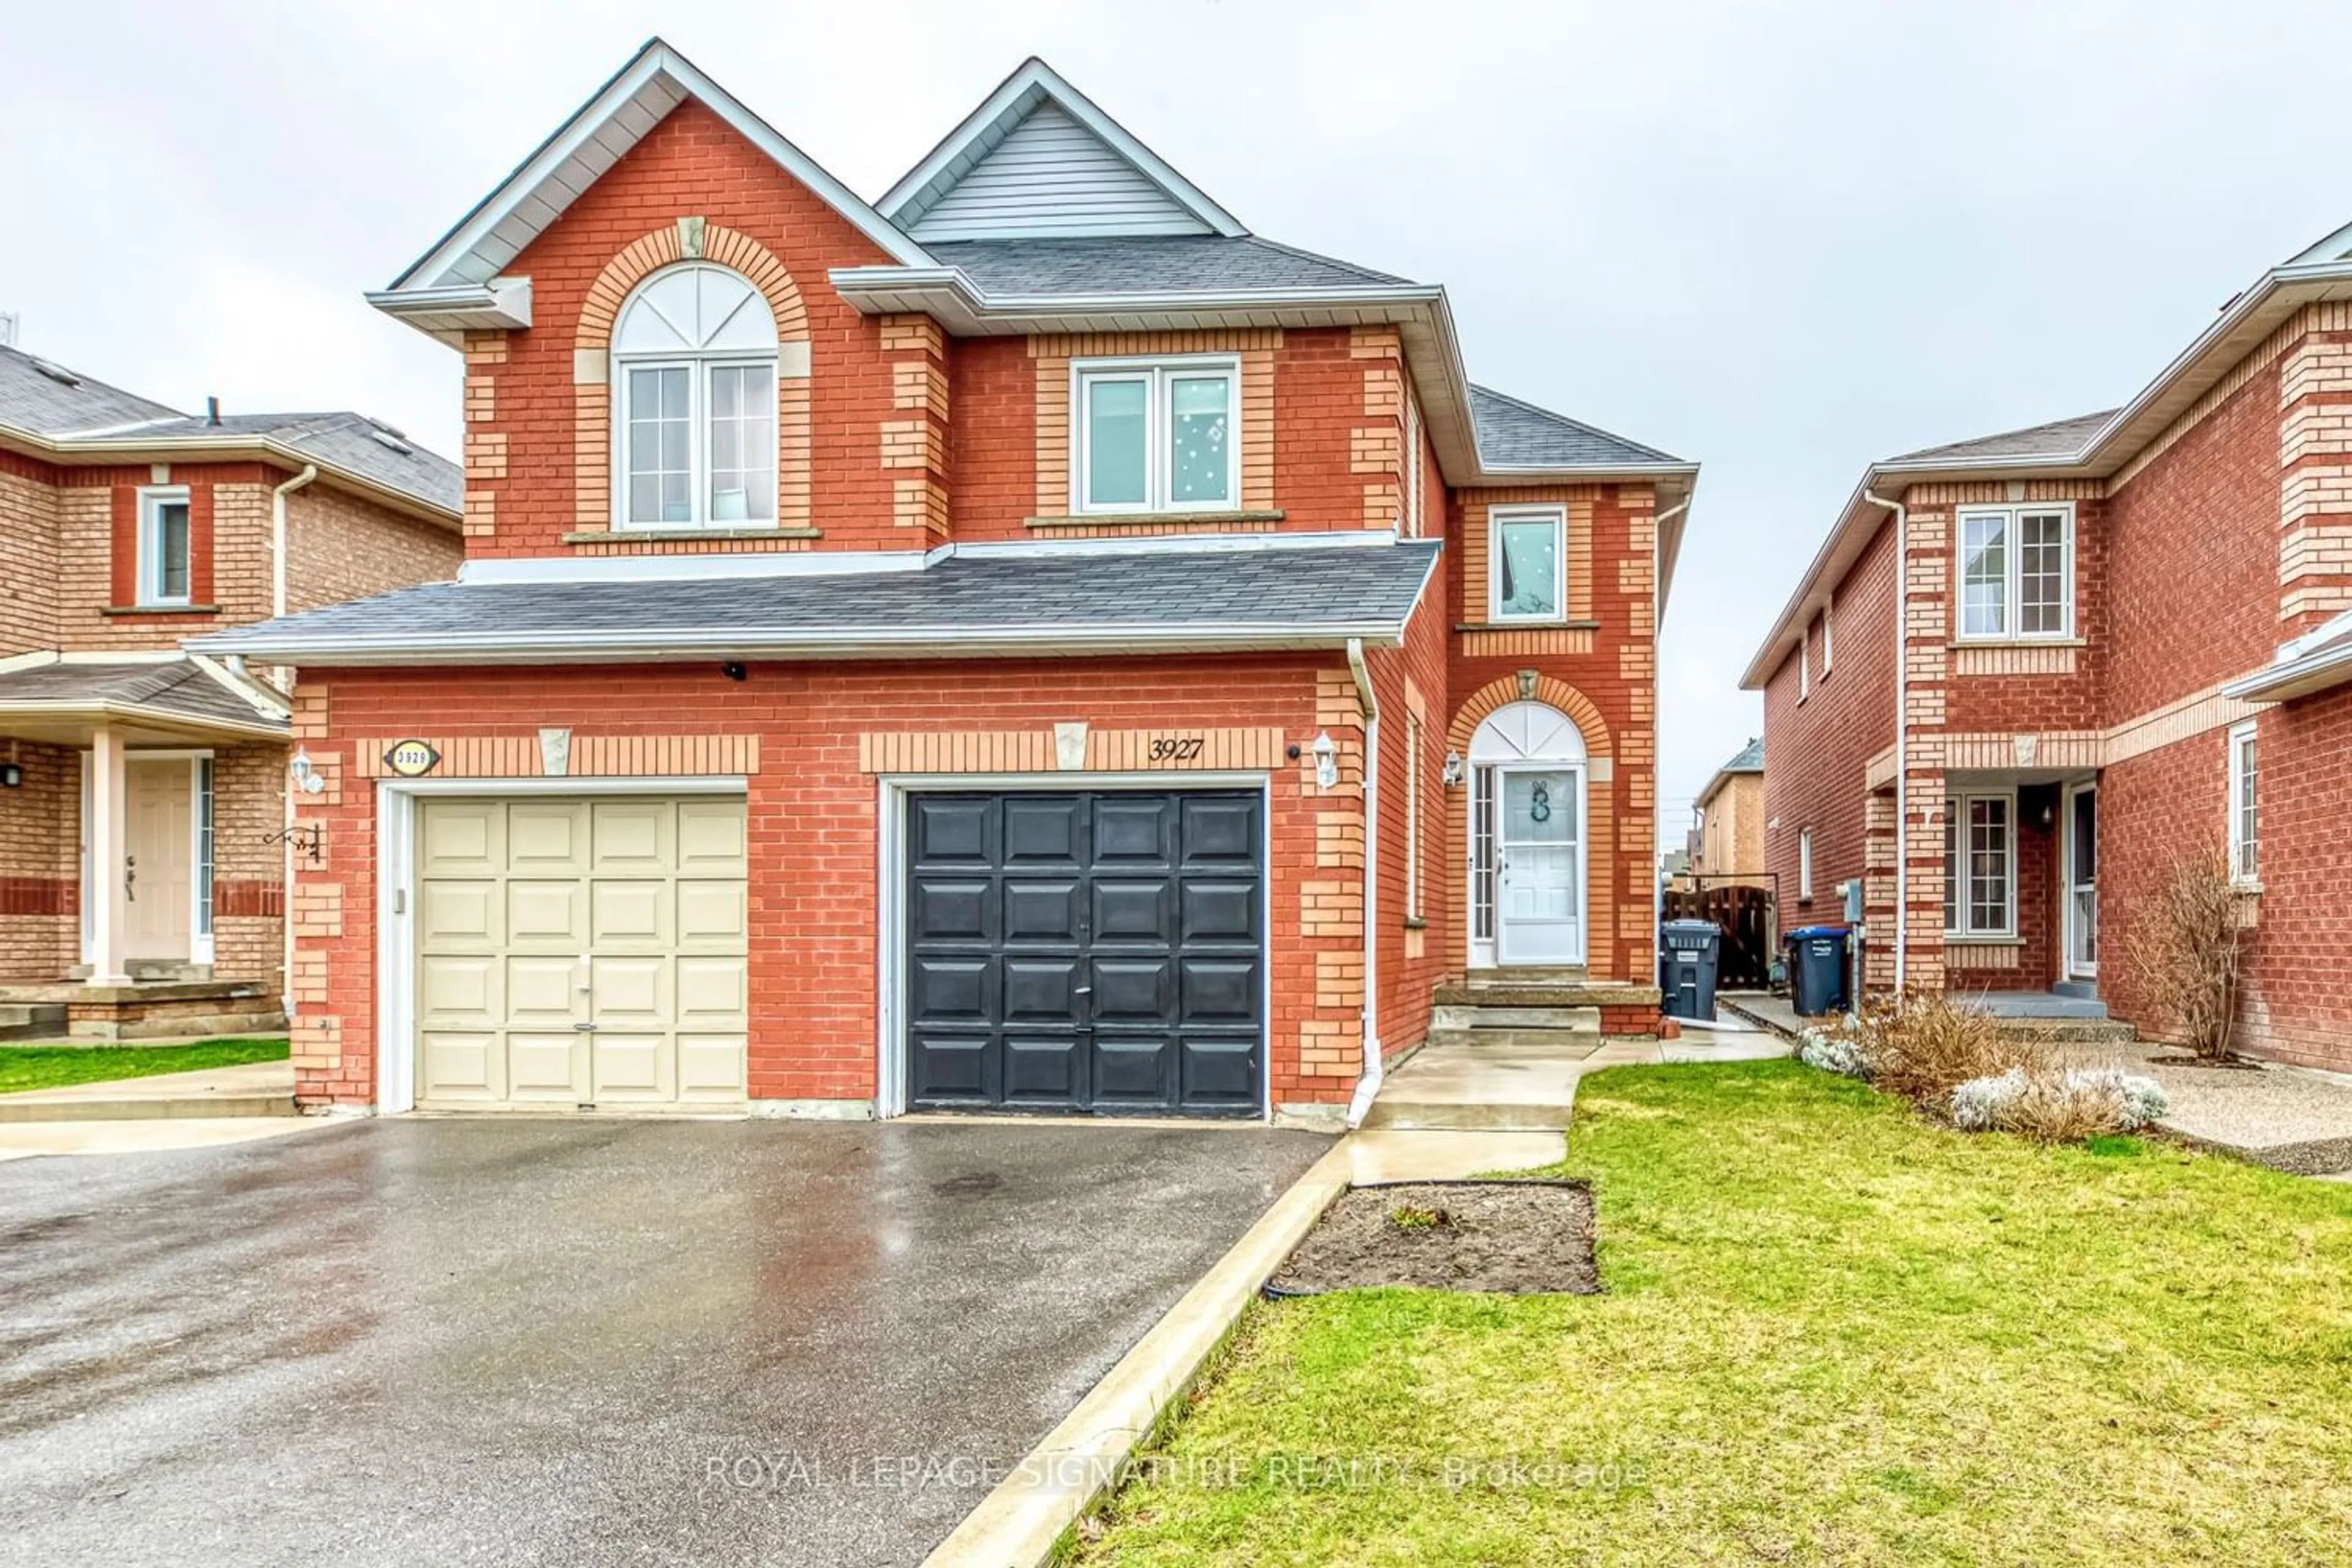 Home with brick exterior material for 3927 Rippleton Lane, Mississauga Ontario L5N 6Z8